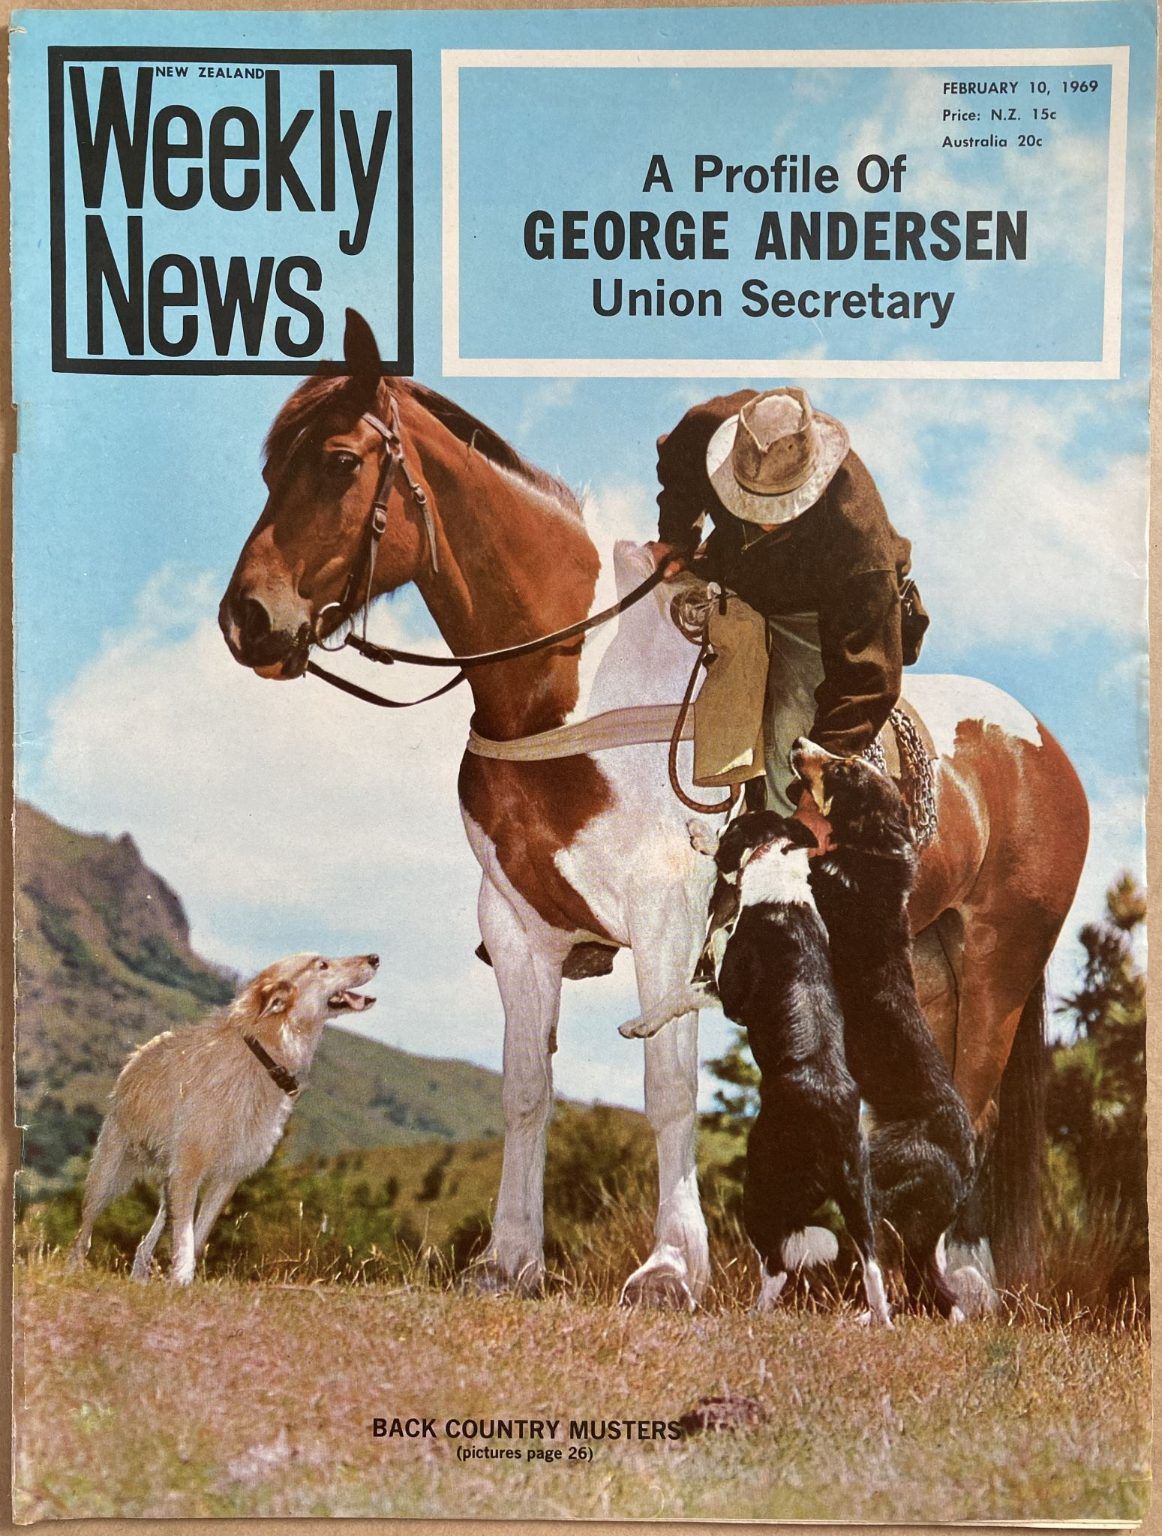 OLD NEWSPAPER: New Zealand Weekly News, No. 5489, 10 February 1969